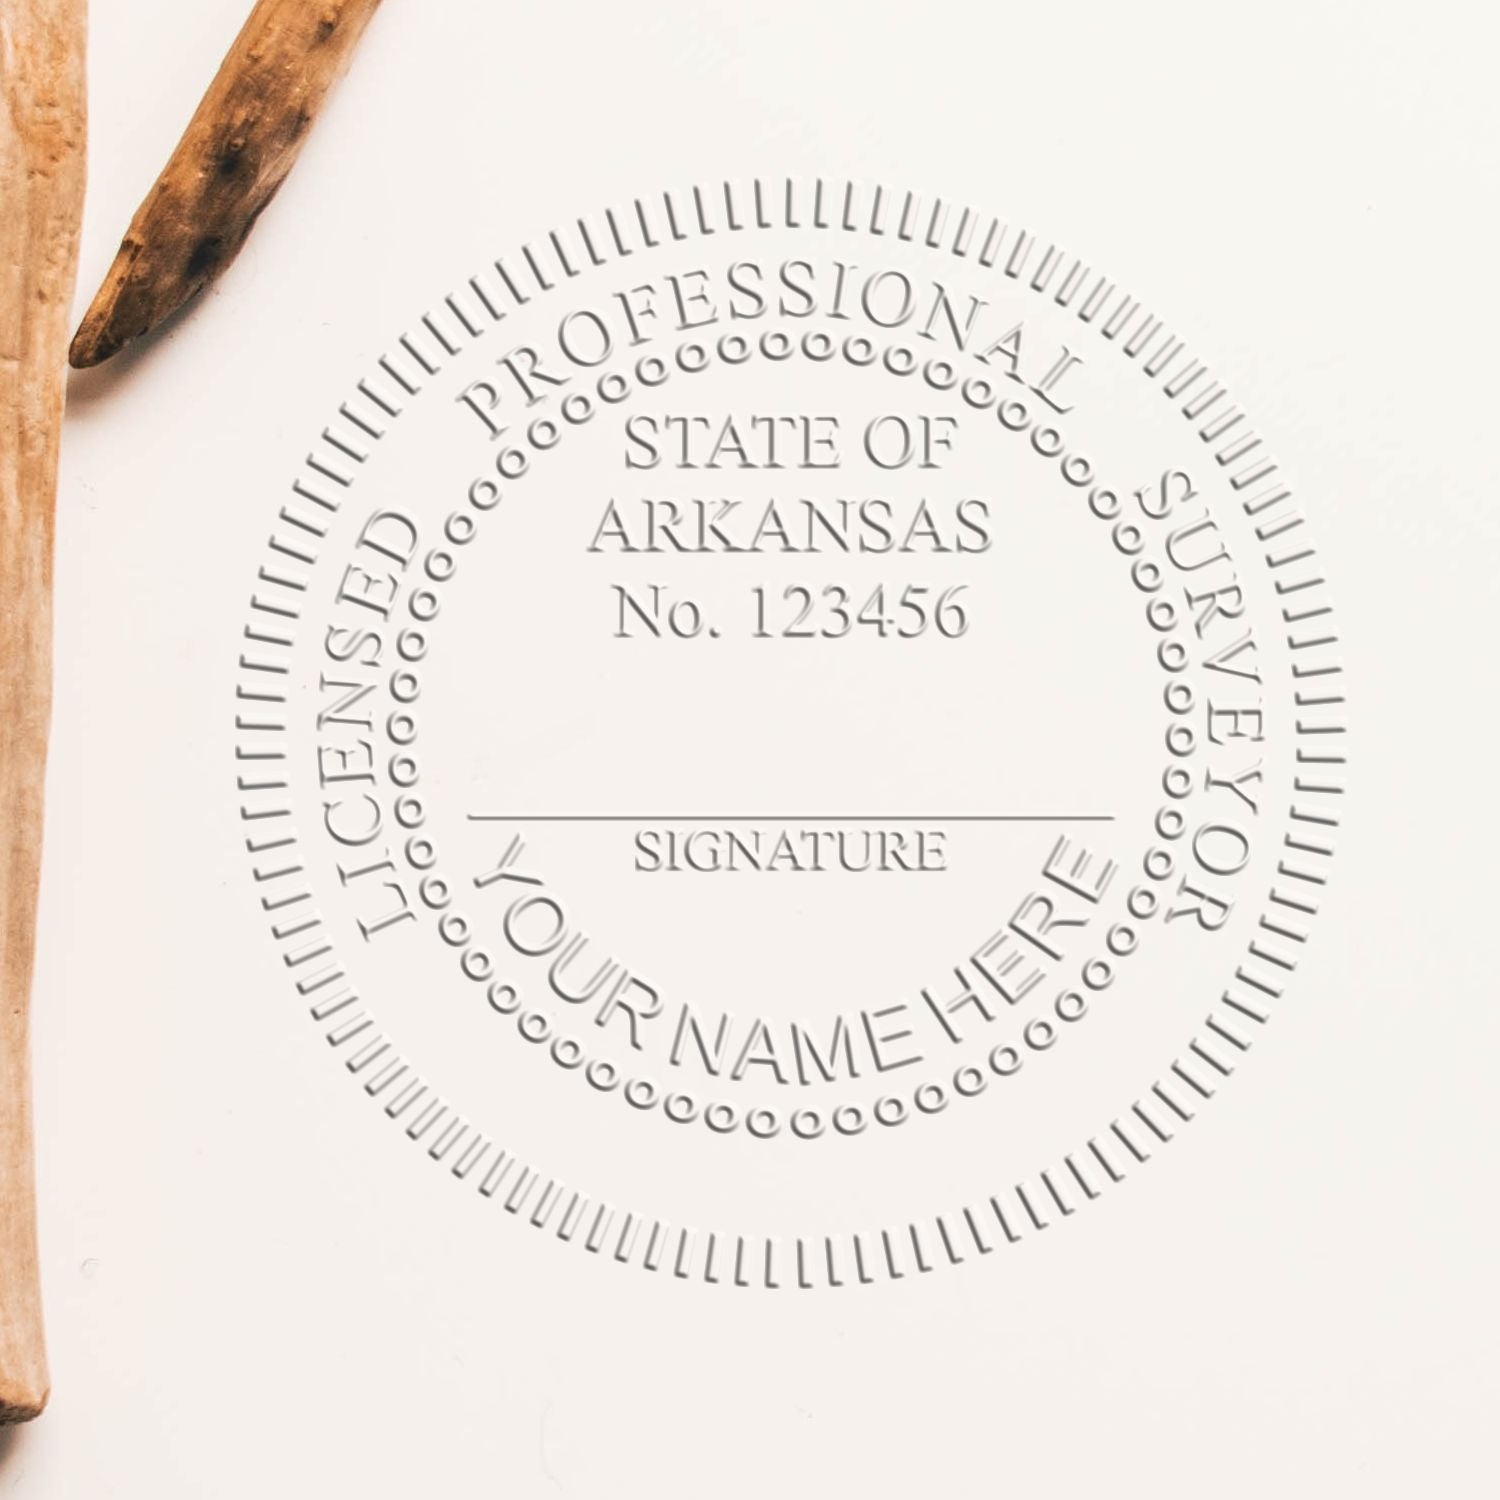 A photograph of the Hybrid Arkansas Land Surveyor Seal stamp impression reveals a vivid, professional image of the on paper.